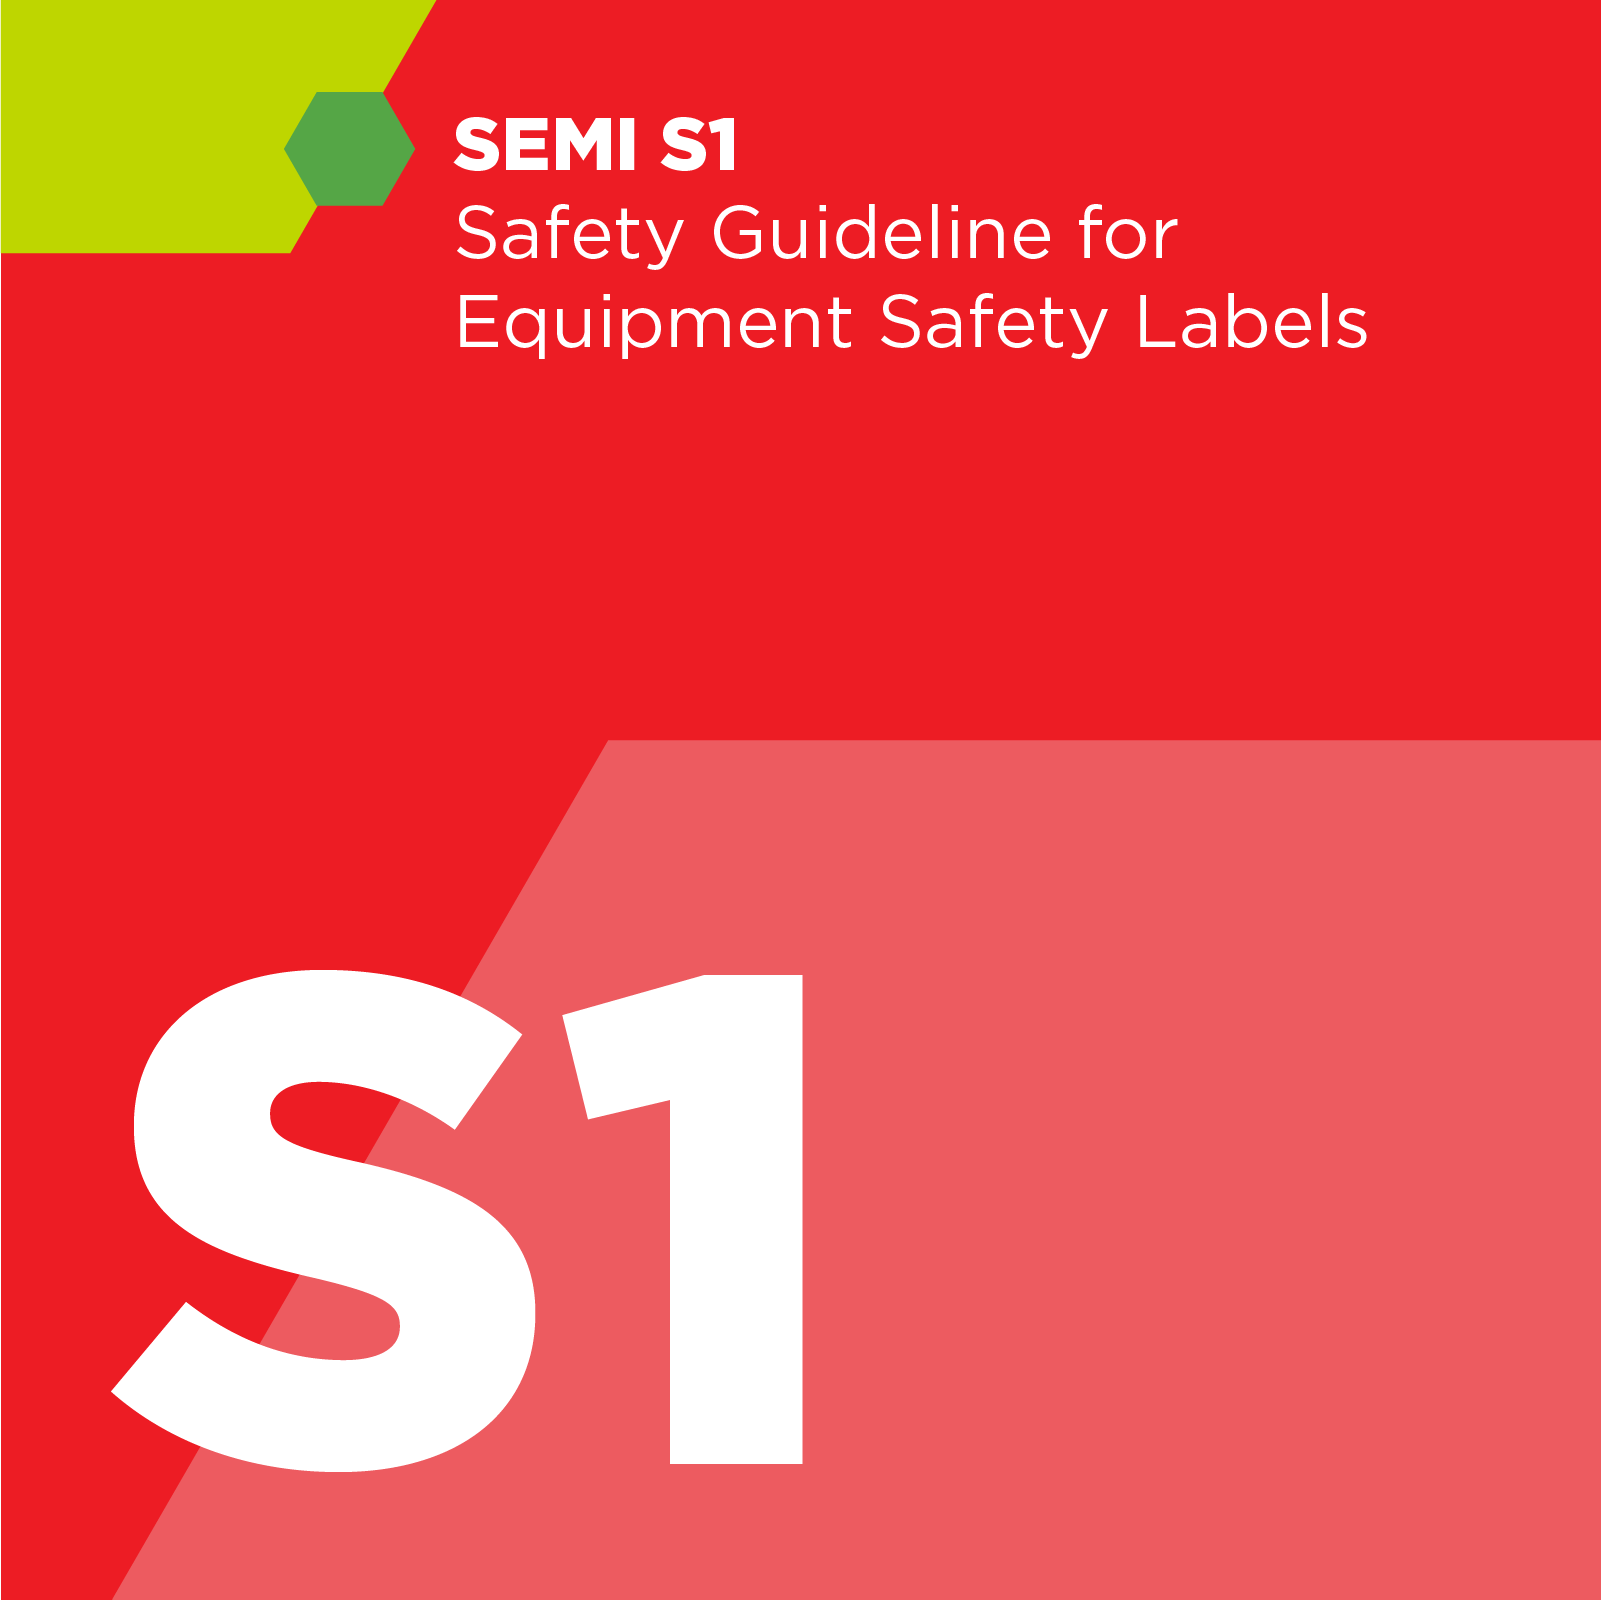 S00100 - SEMI S1 - Safety Guideline for Equipment Safety Labels